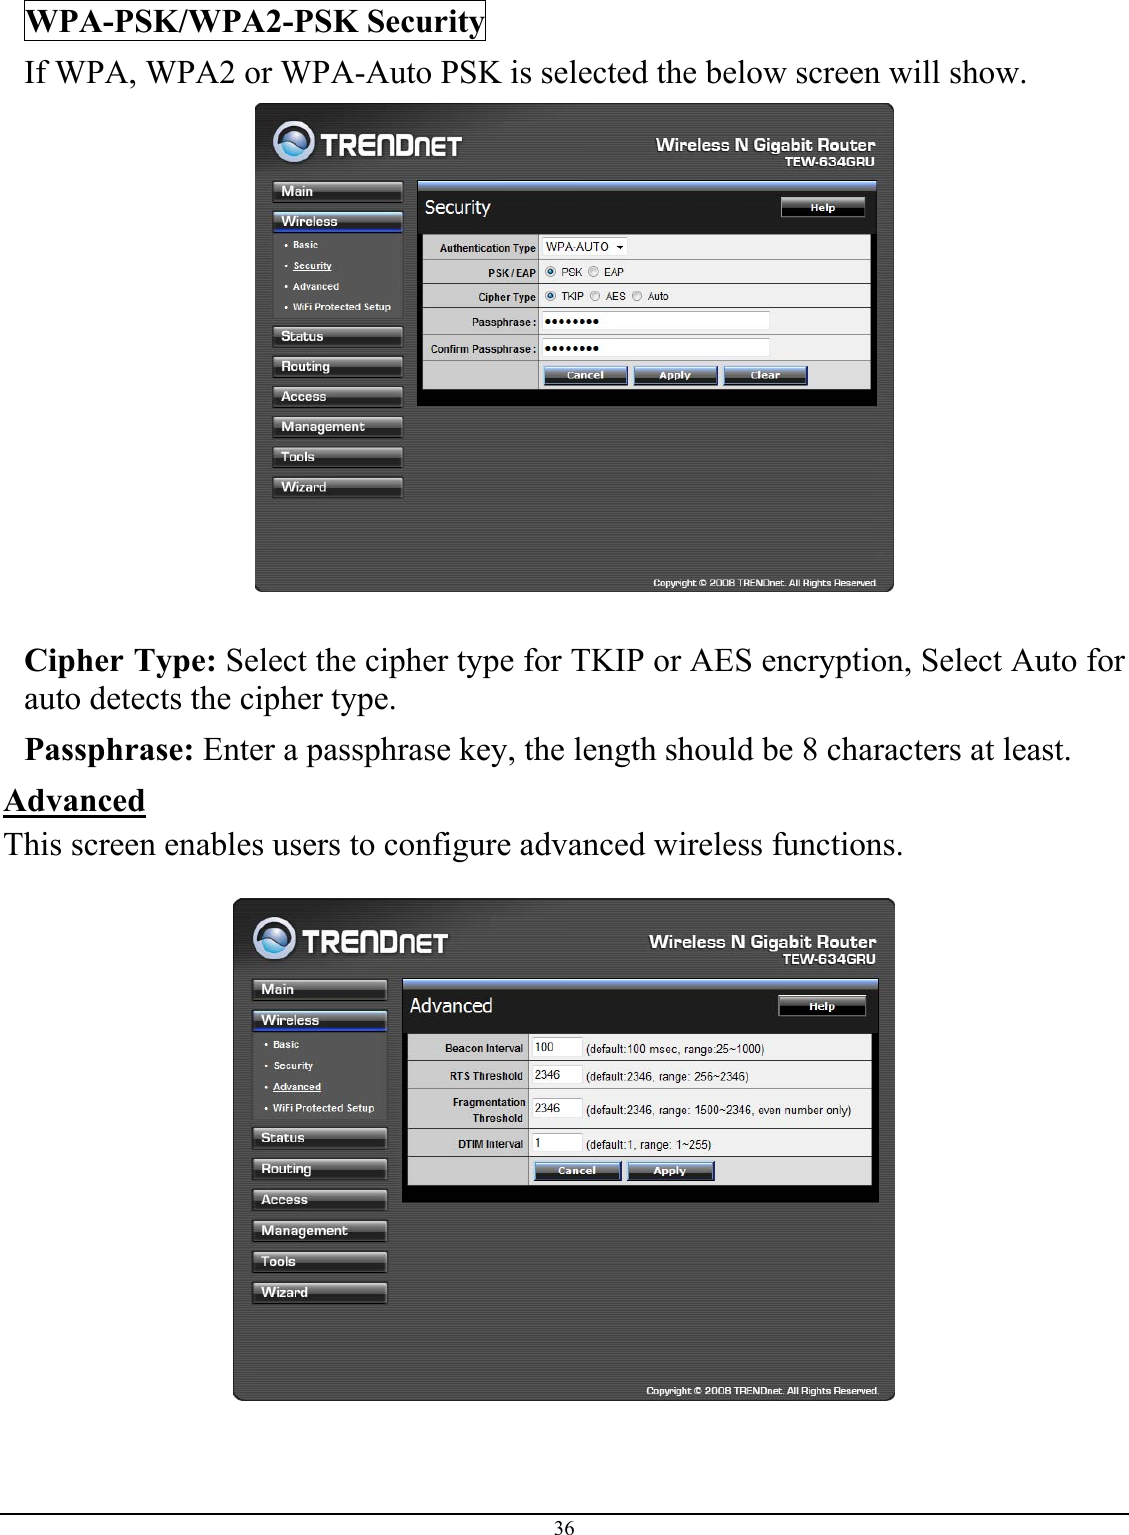 36  WPA-PSK/WPA2-PSK Security If WPA, WPA2 or WPA-Auto PSK is selected the below screen will show.   Cipher Type: Select the cipher type for TKIP or AES encryption, Select Auto for auto detects the cipher type.  Passphrase: Enter a passphrase key, the length should be 8 characters at least.  Advanced This screen enables users to configure advanced wireless functions.    